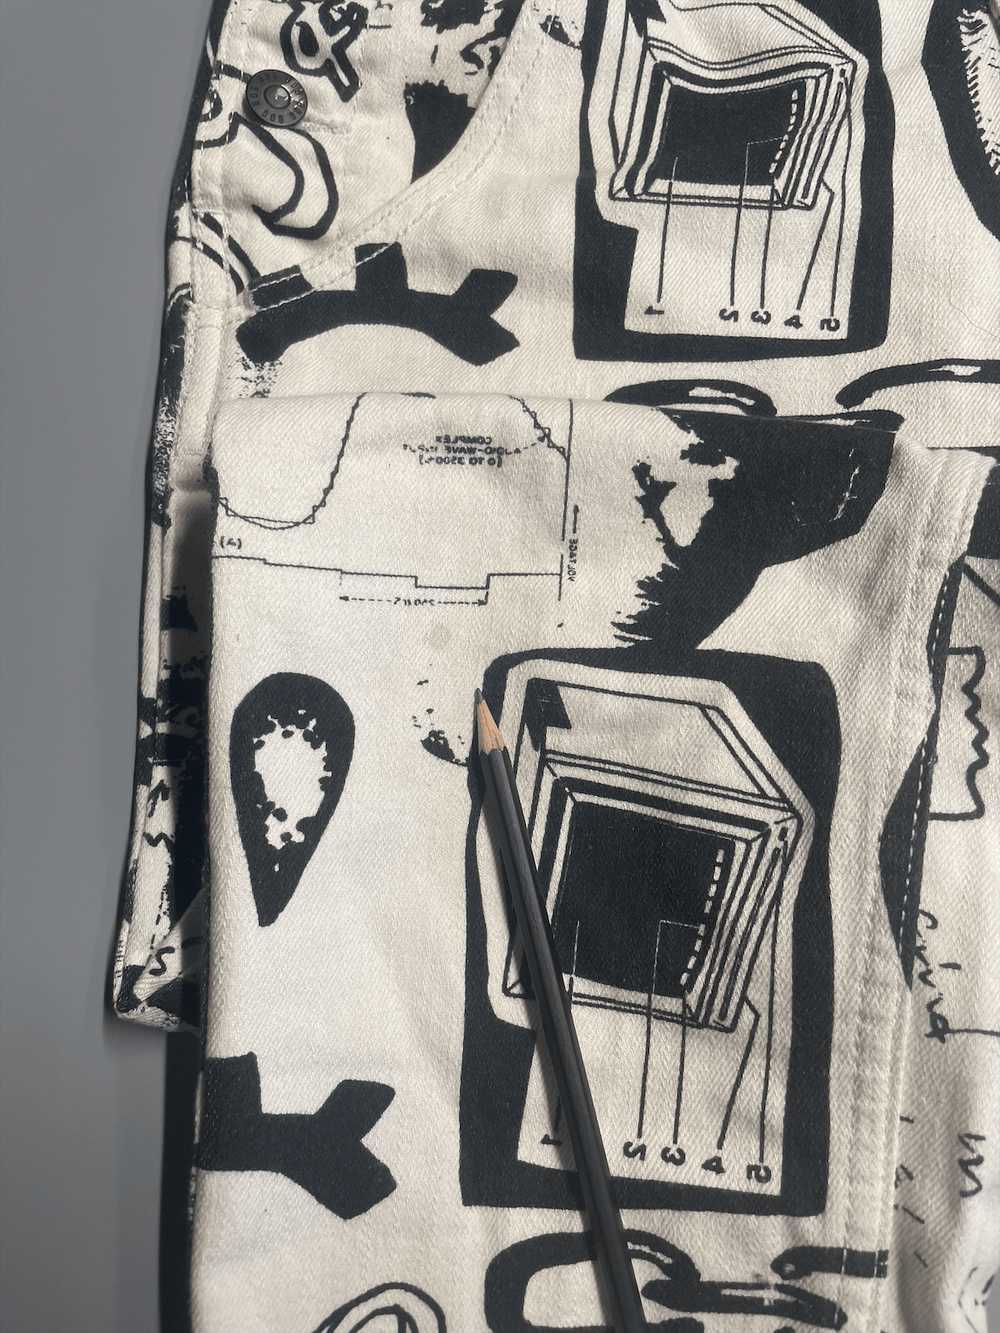 Streetwear B&W All Over Print Overalls - image 3